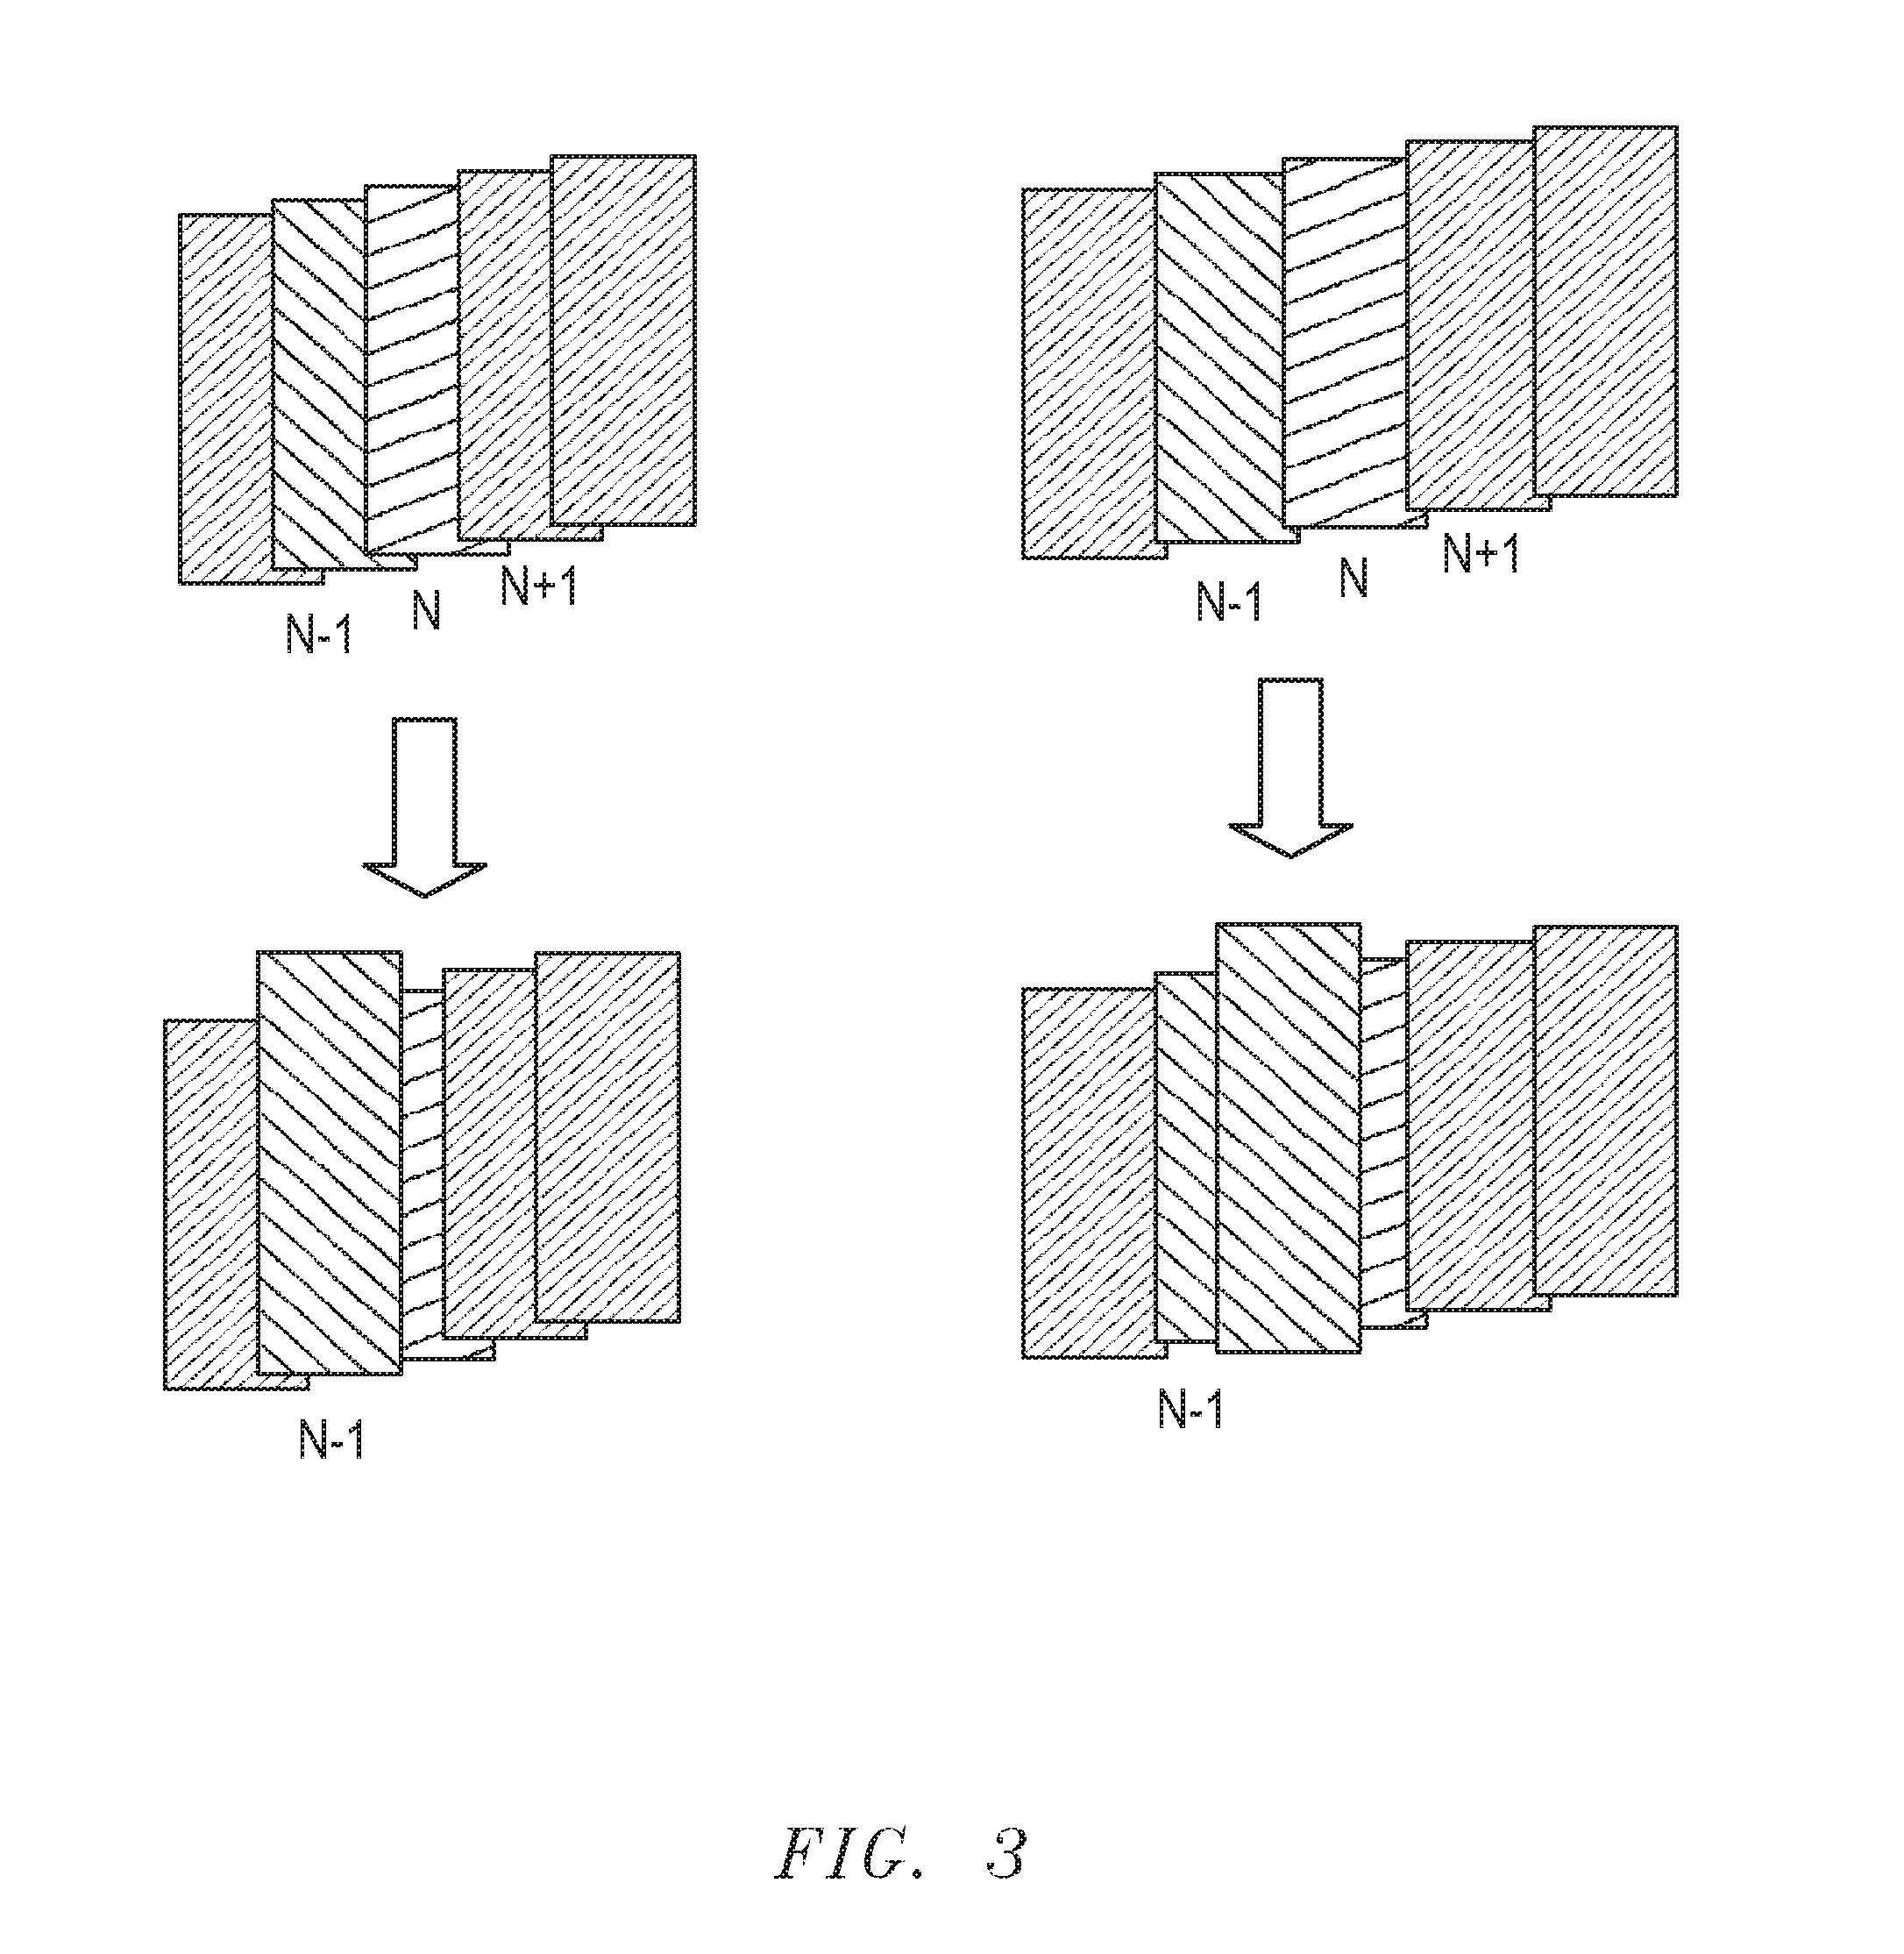 System, method and apparatus for shingled magnetic recording in disk drives